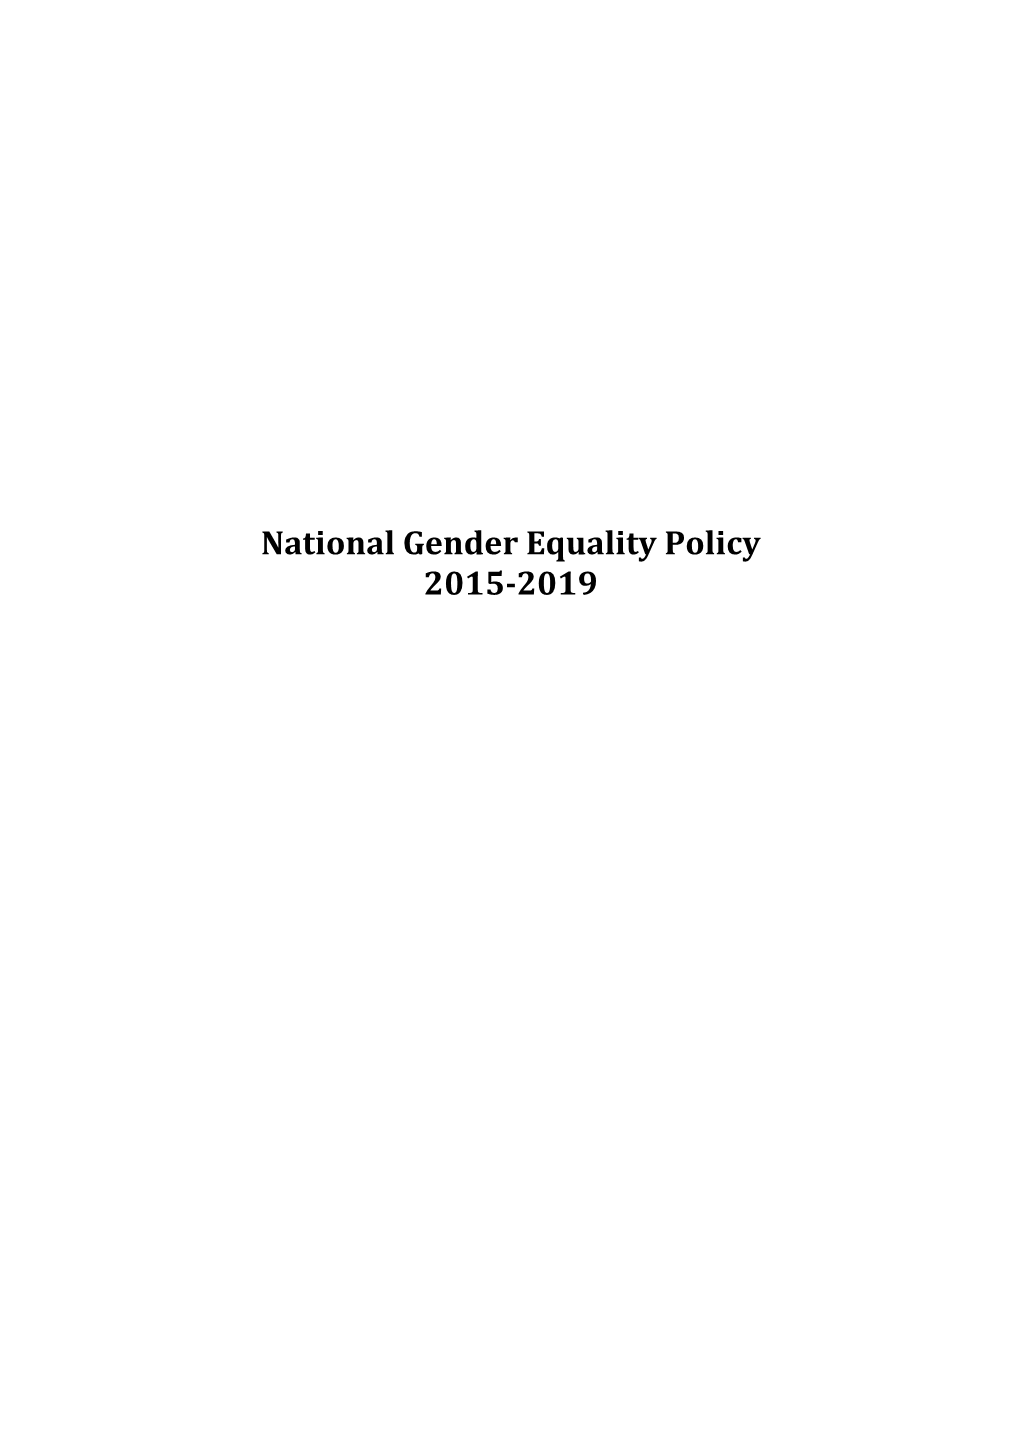 National Gender Equality Policy 2015-2019